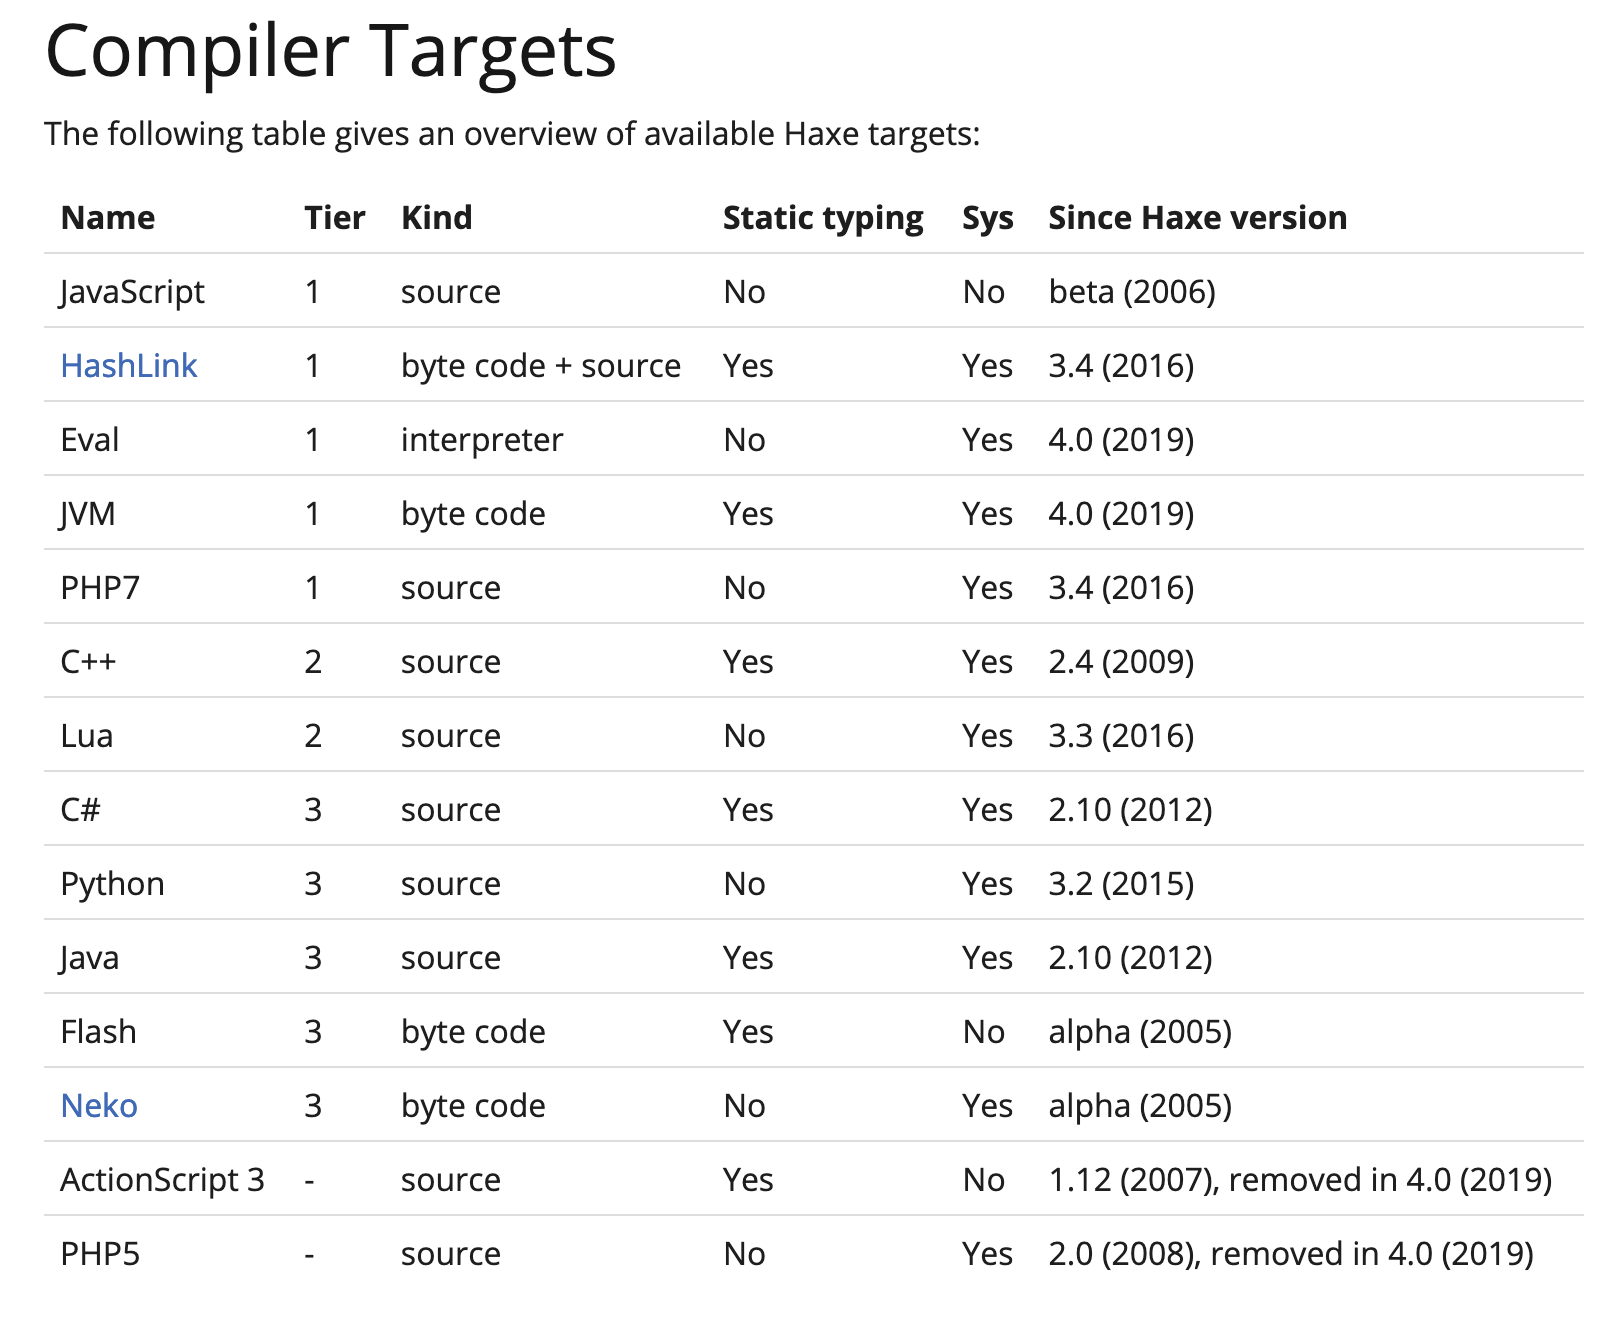 https://haxe.org/documentation/introduction/compiler-targets.html